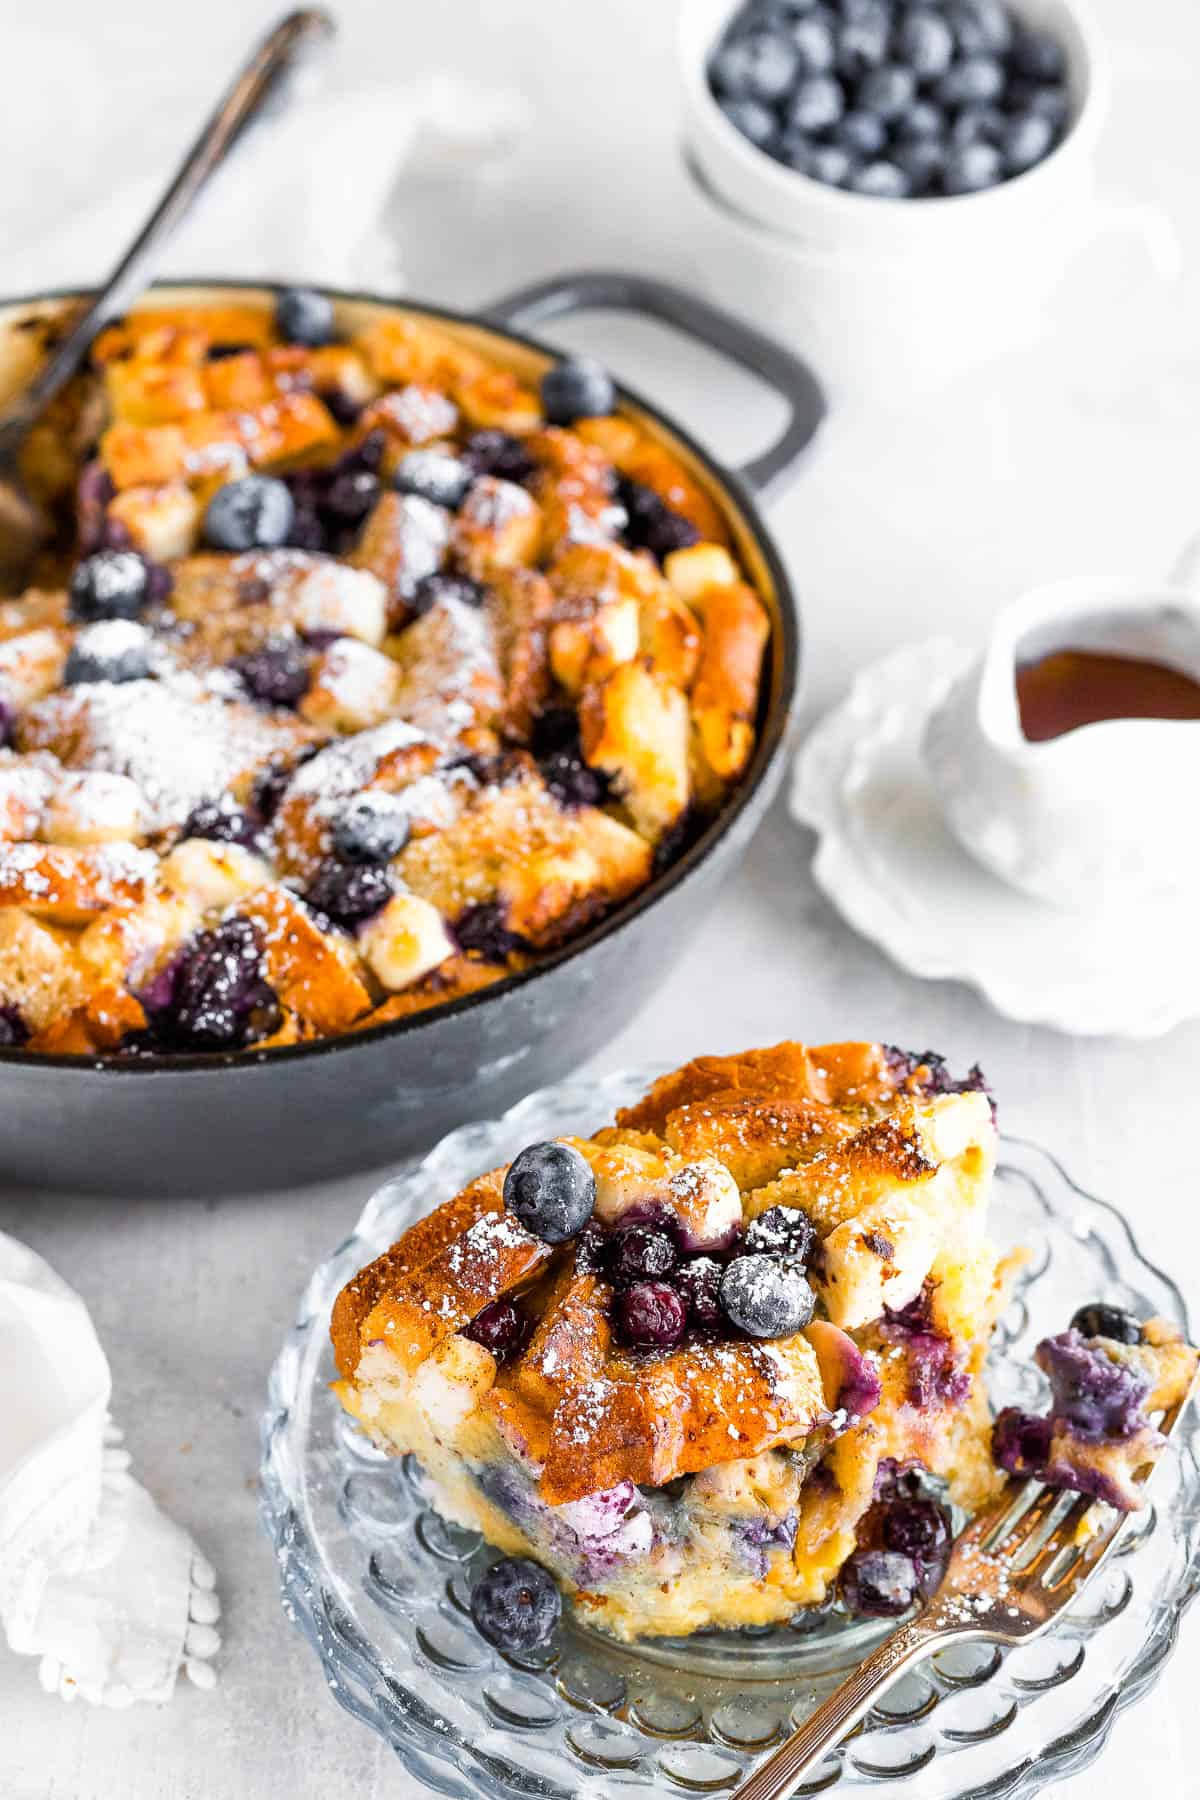 A Serving of Blueberry French Toast Bake on a Plate with the Full Casserole Behind it